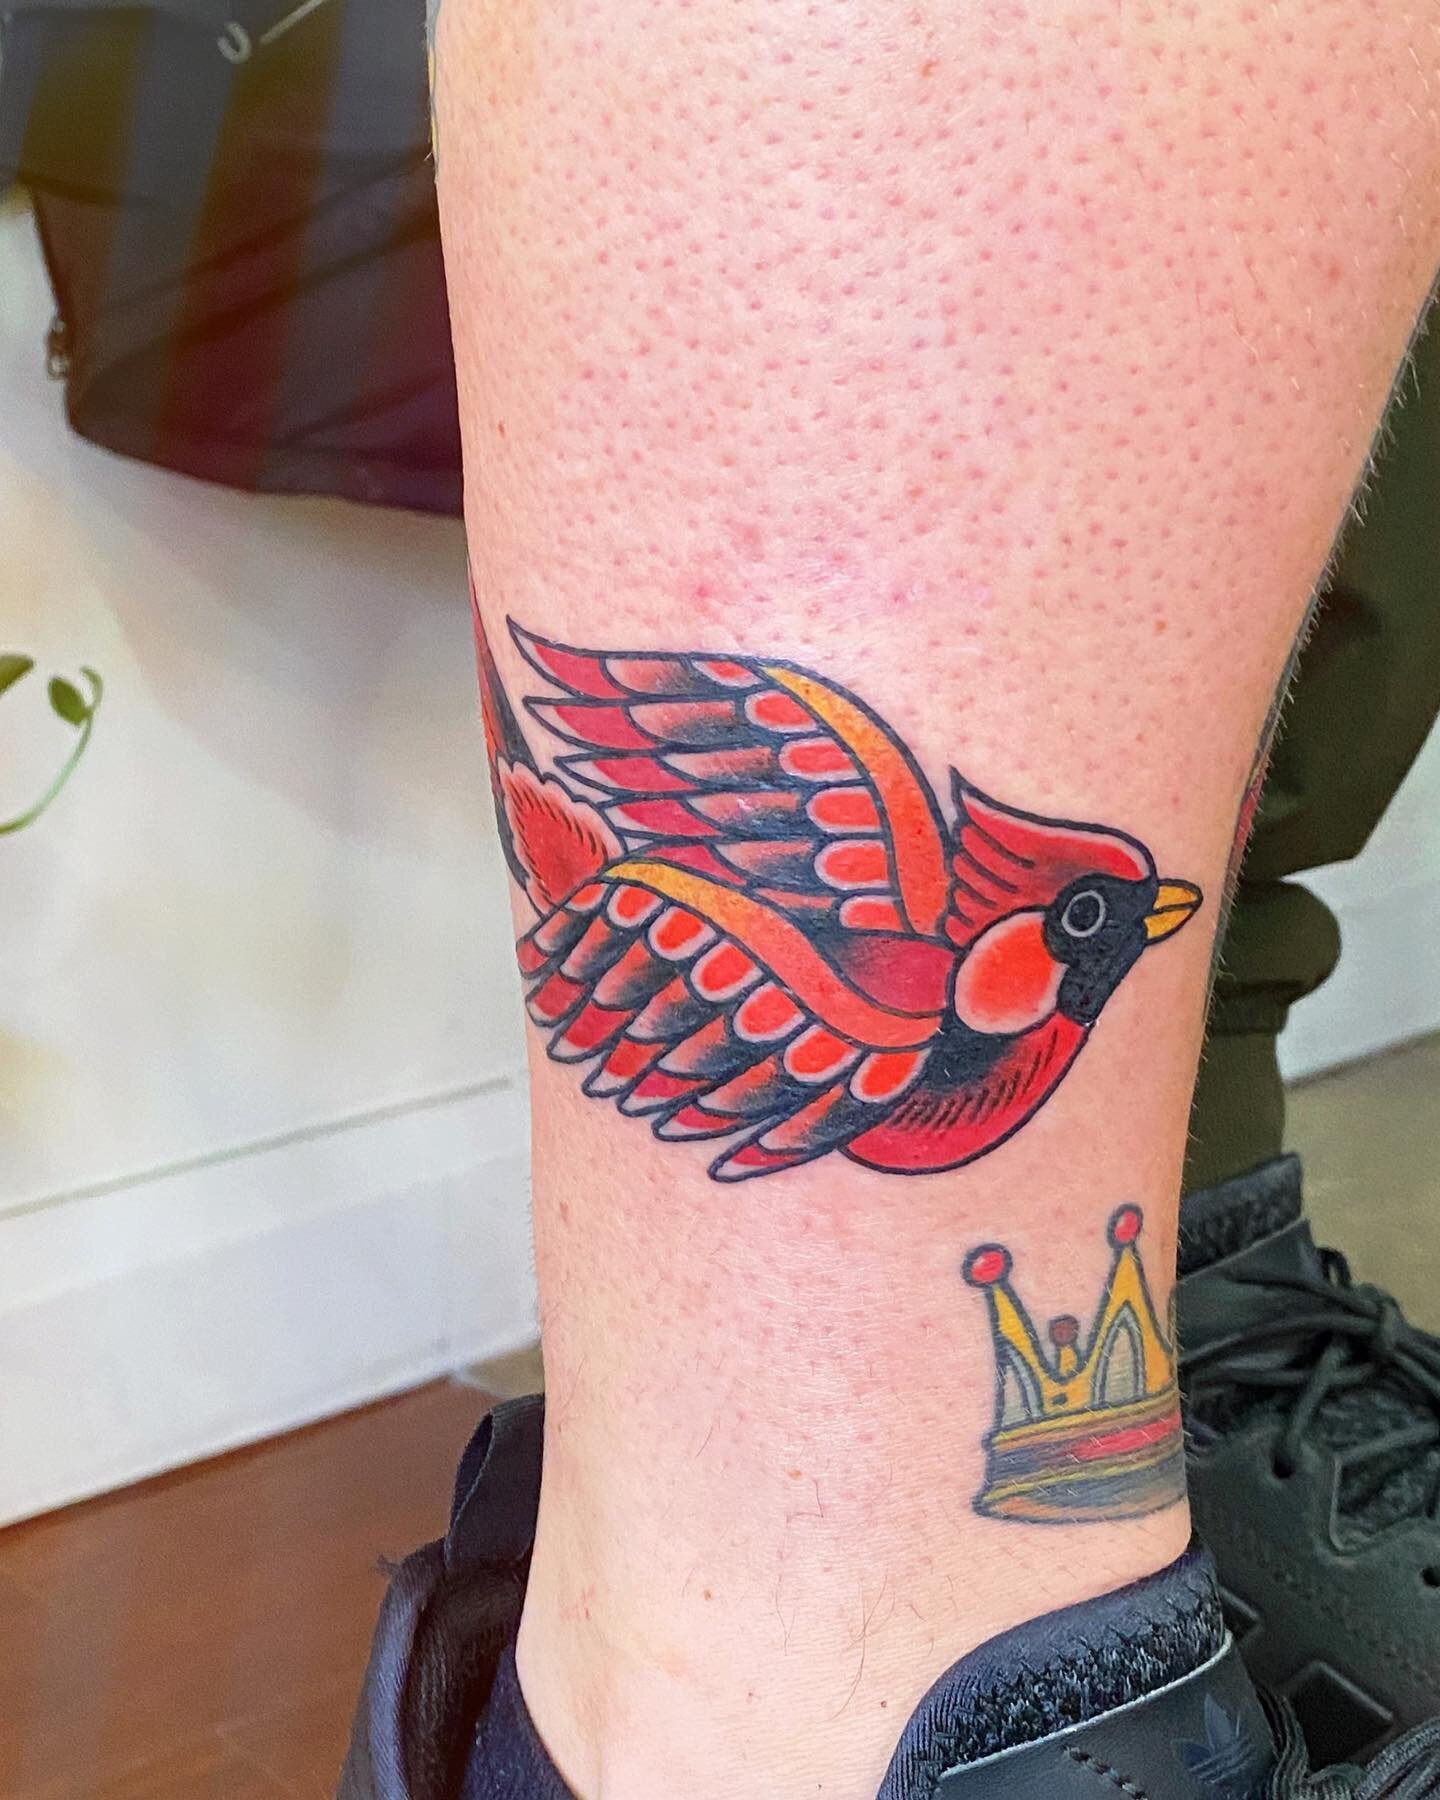 My job is the worst guys idk what to tell you. Old Crows Young Cardinals @aof_official tattoos today for Erik. Impossible to photograph cause they wrap to meet at the back 🙃 dagger and crown also by me from last year, lighthouse scene from the befor